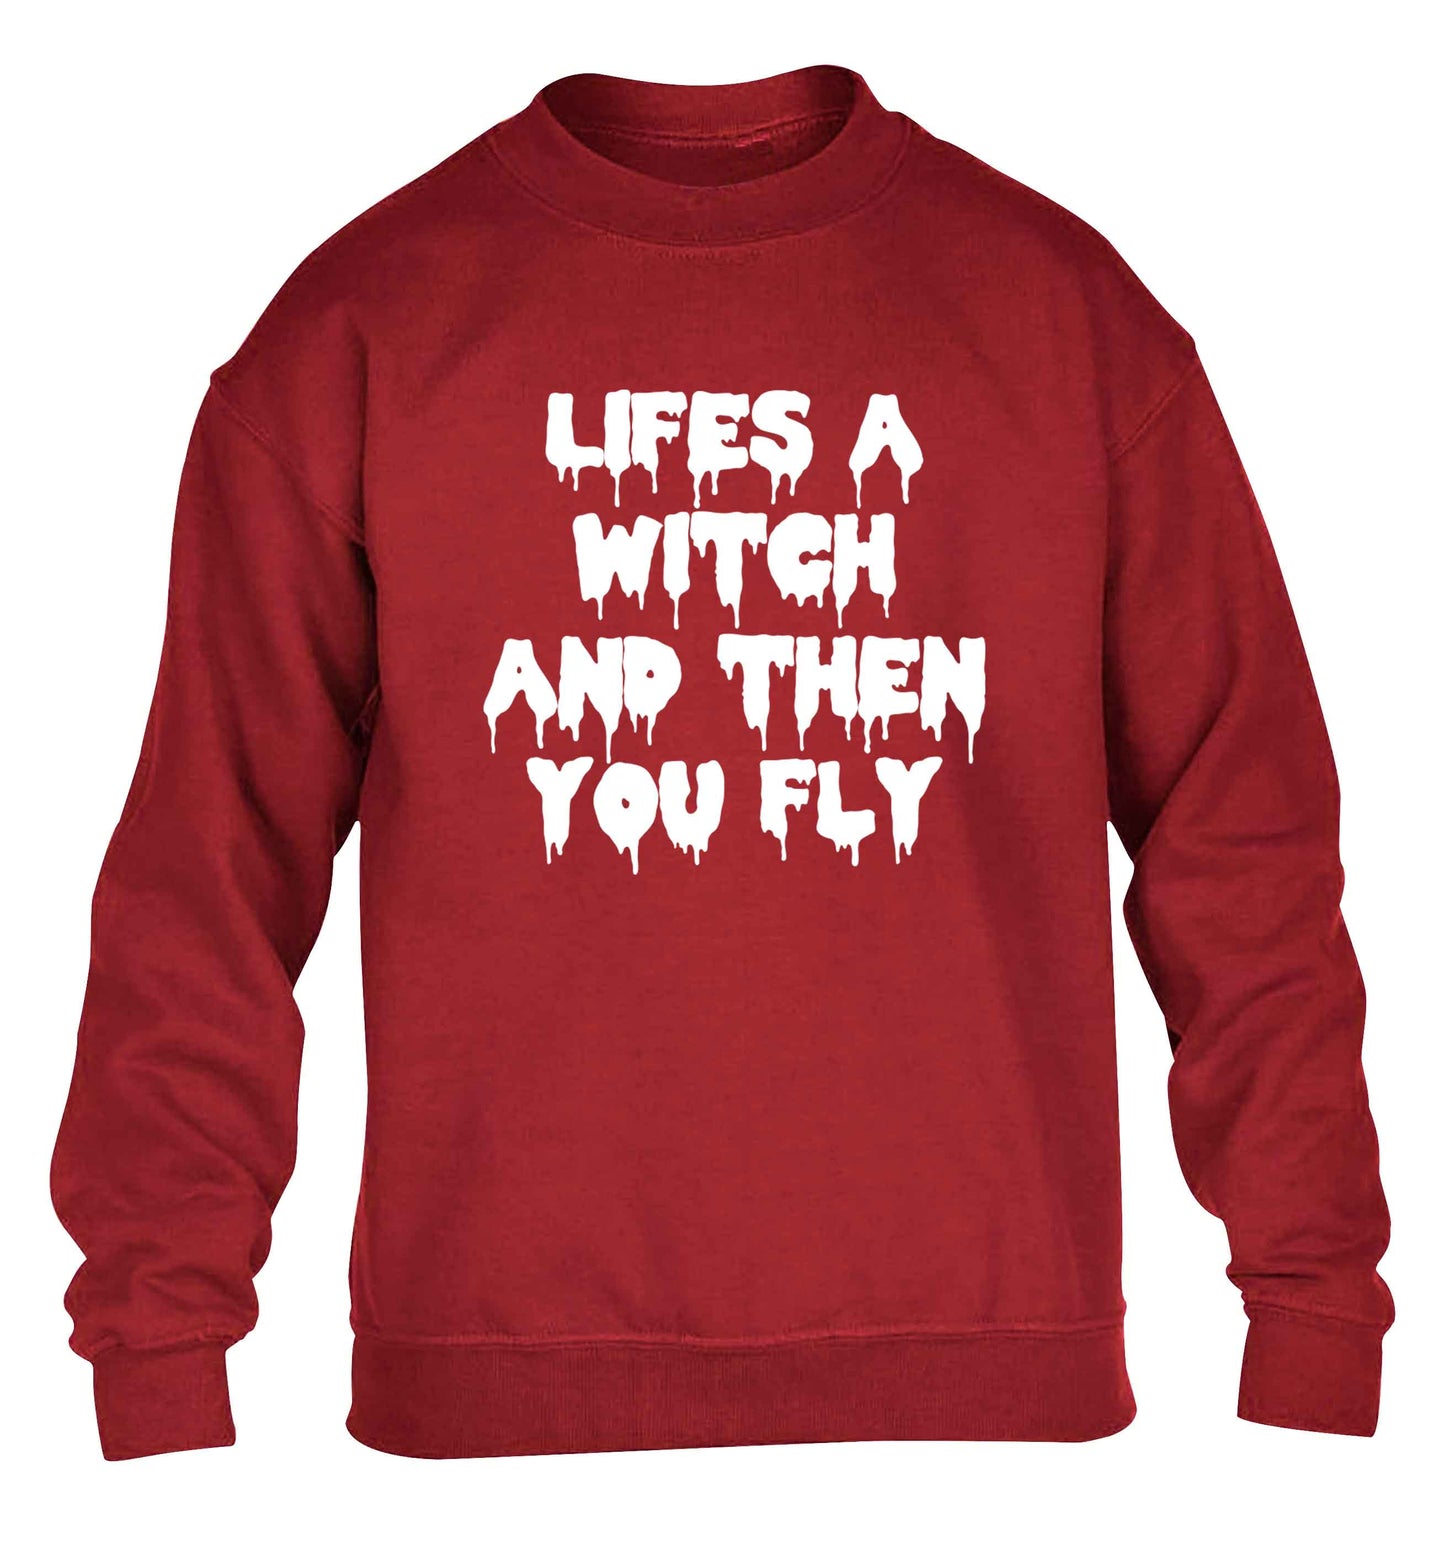 Life's a witch and then you fly children's grey sweater 12-13 Years